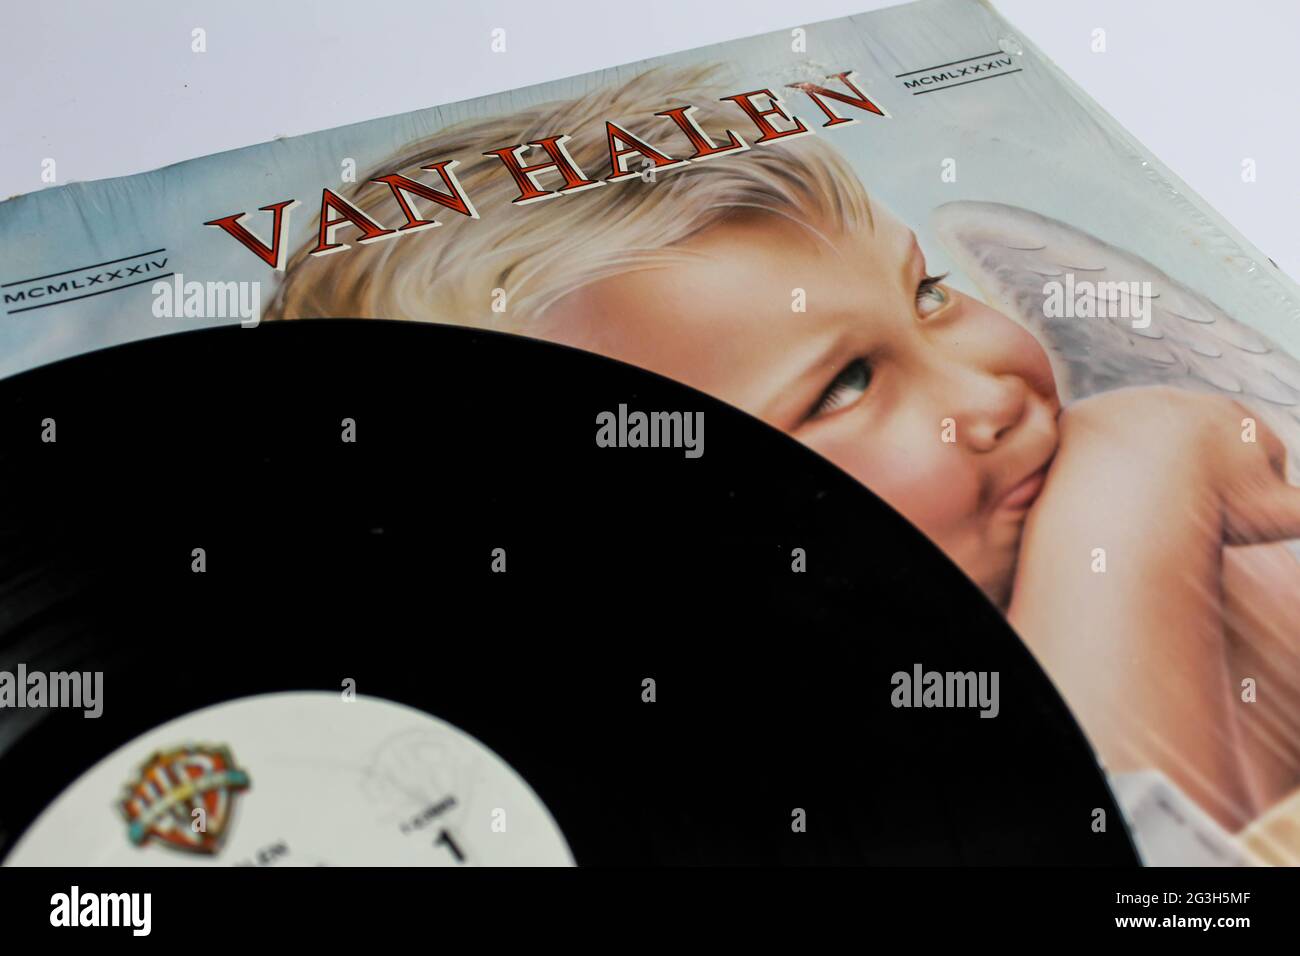 Hard rock, heavy metal and glam metal band, Van Halen music album on vinyl record LP disc. Titled: 1984 also known as MCMLXXXIV album cover Stock Photo